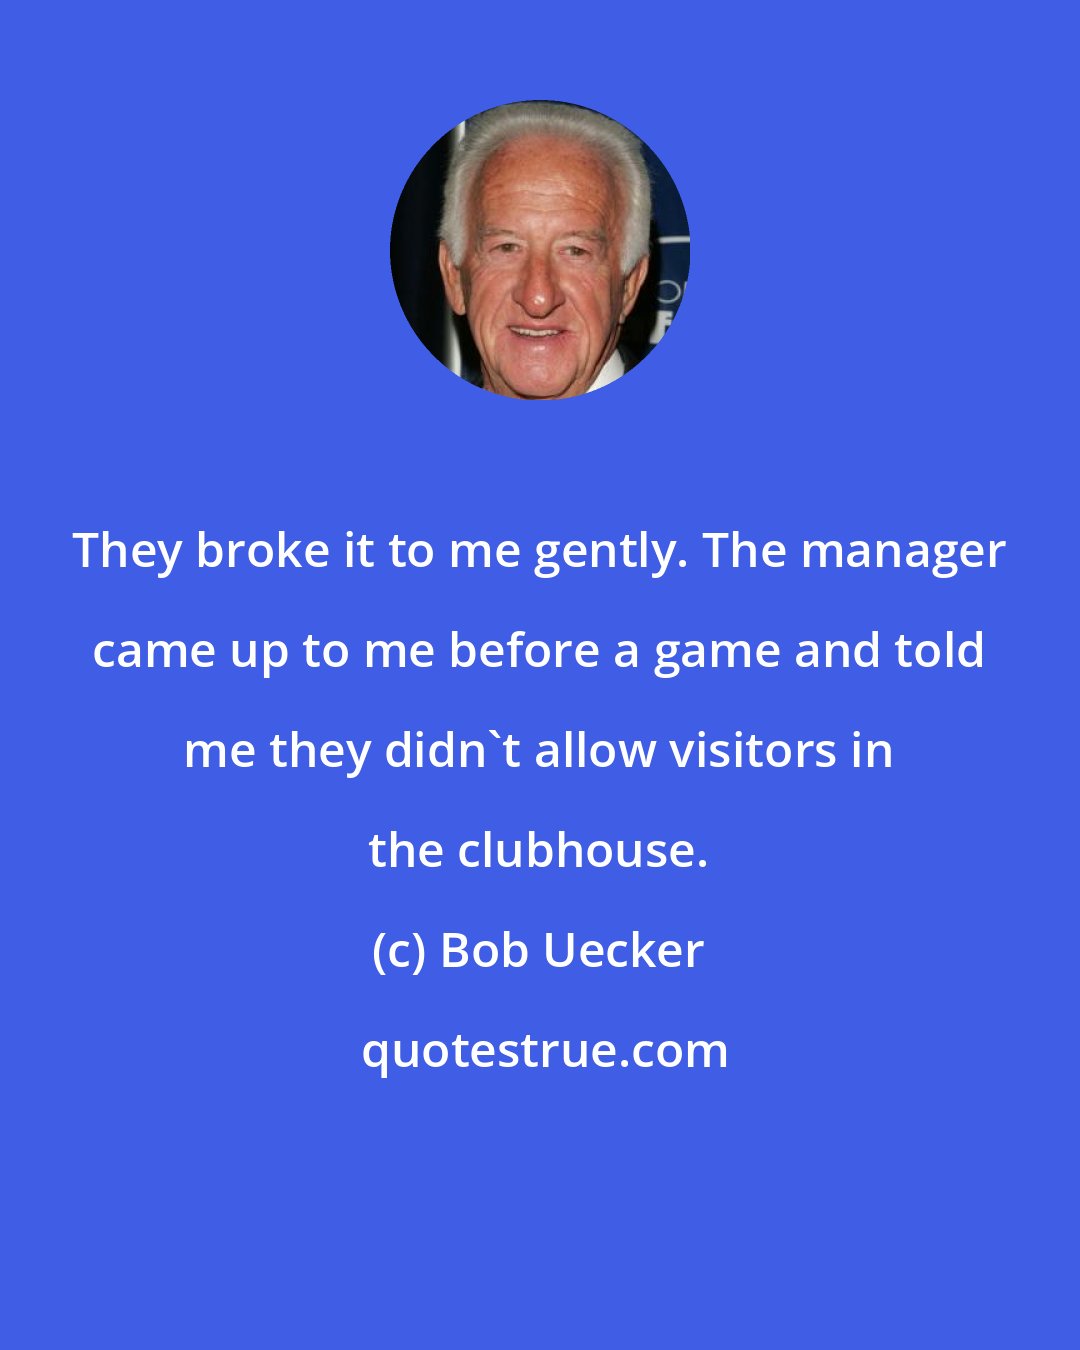 Bob Uecker: They broke it to me gently. The manager came up to me before a game and told me they didn't allow visitors in the clubhouse.